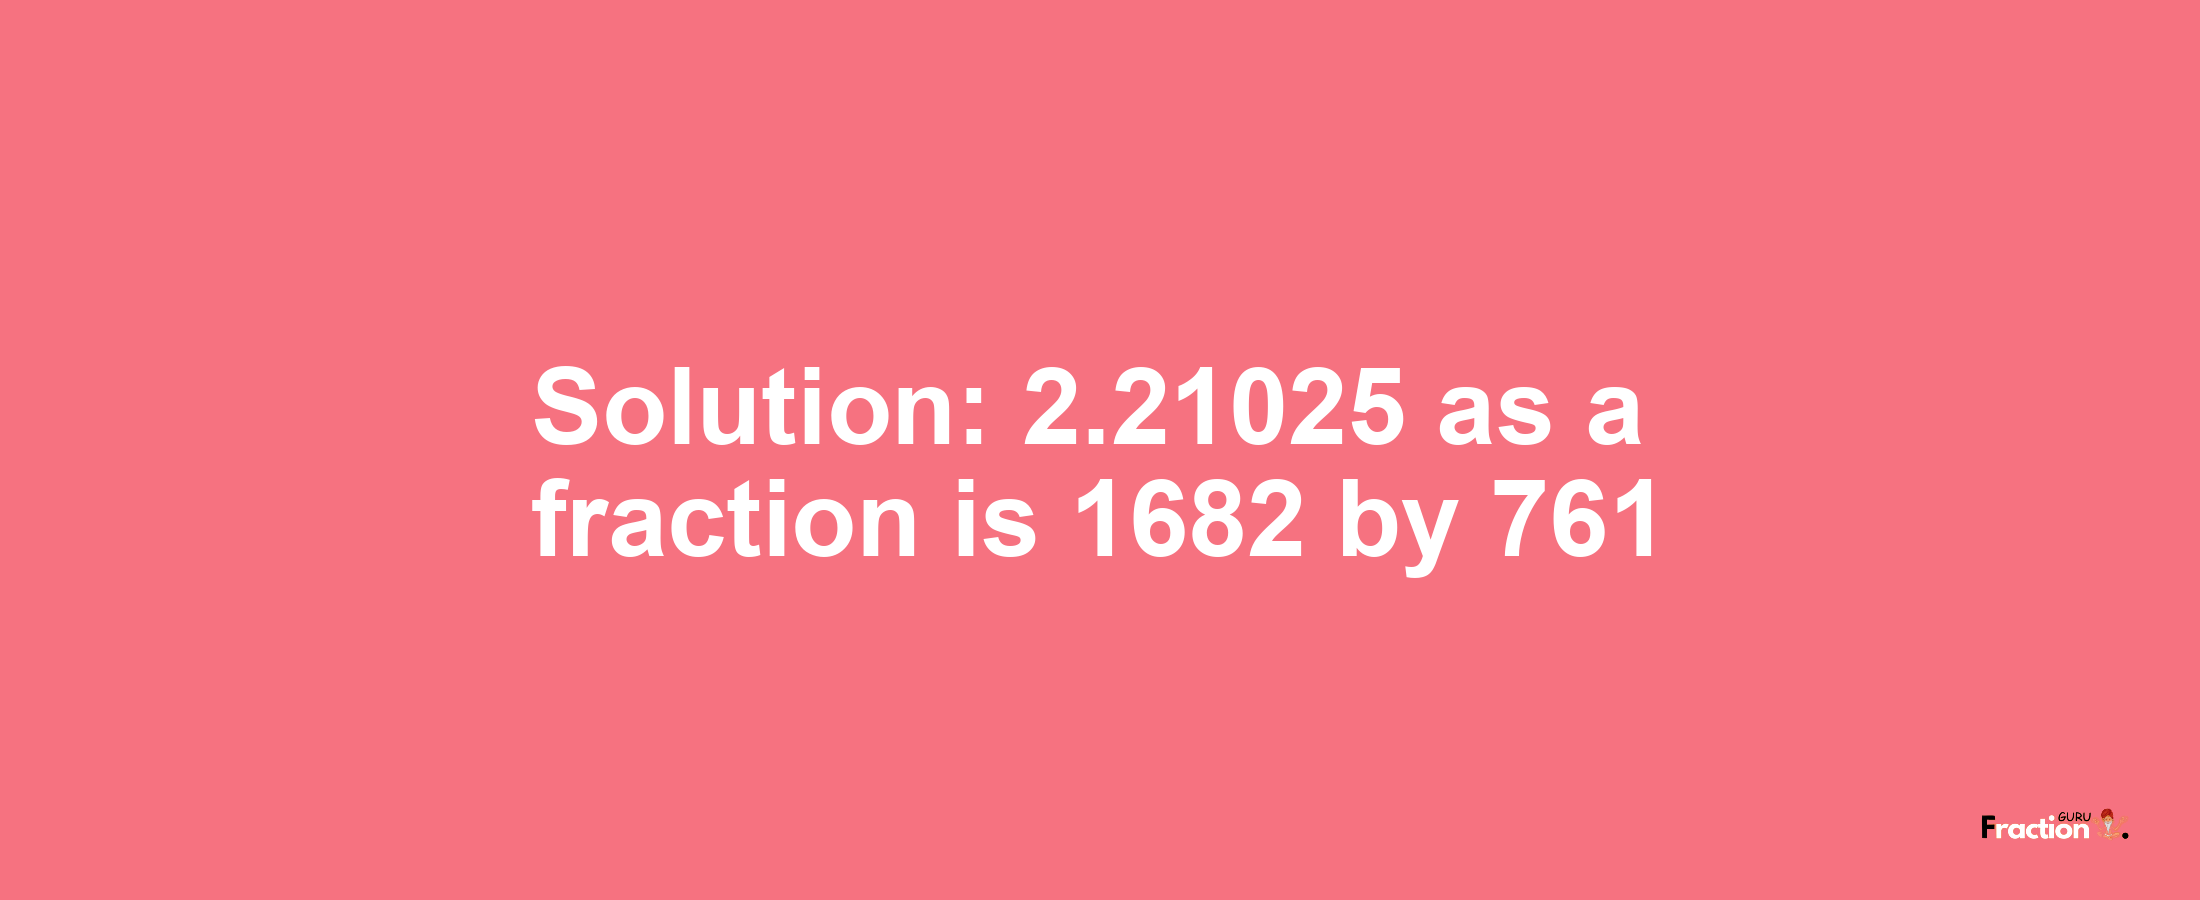 Solution:2.21025 as a fraction is 1682/761